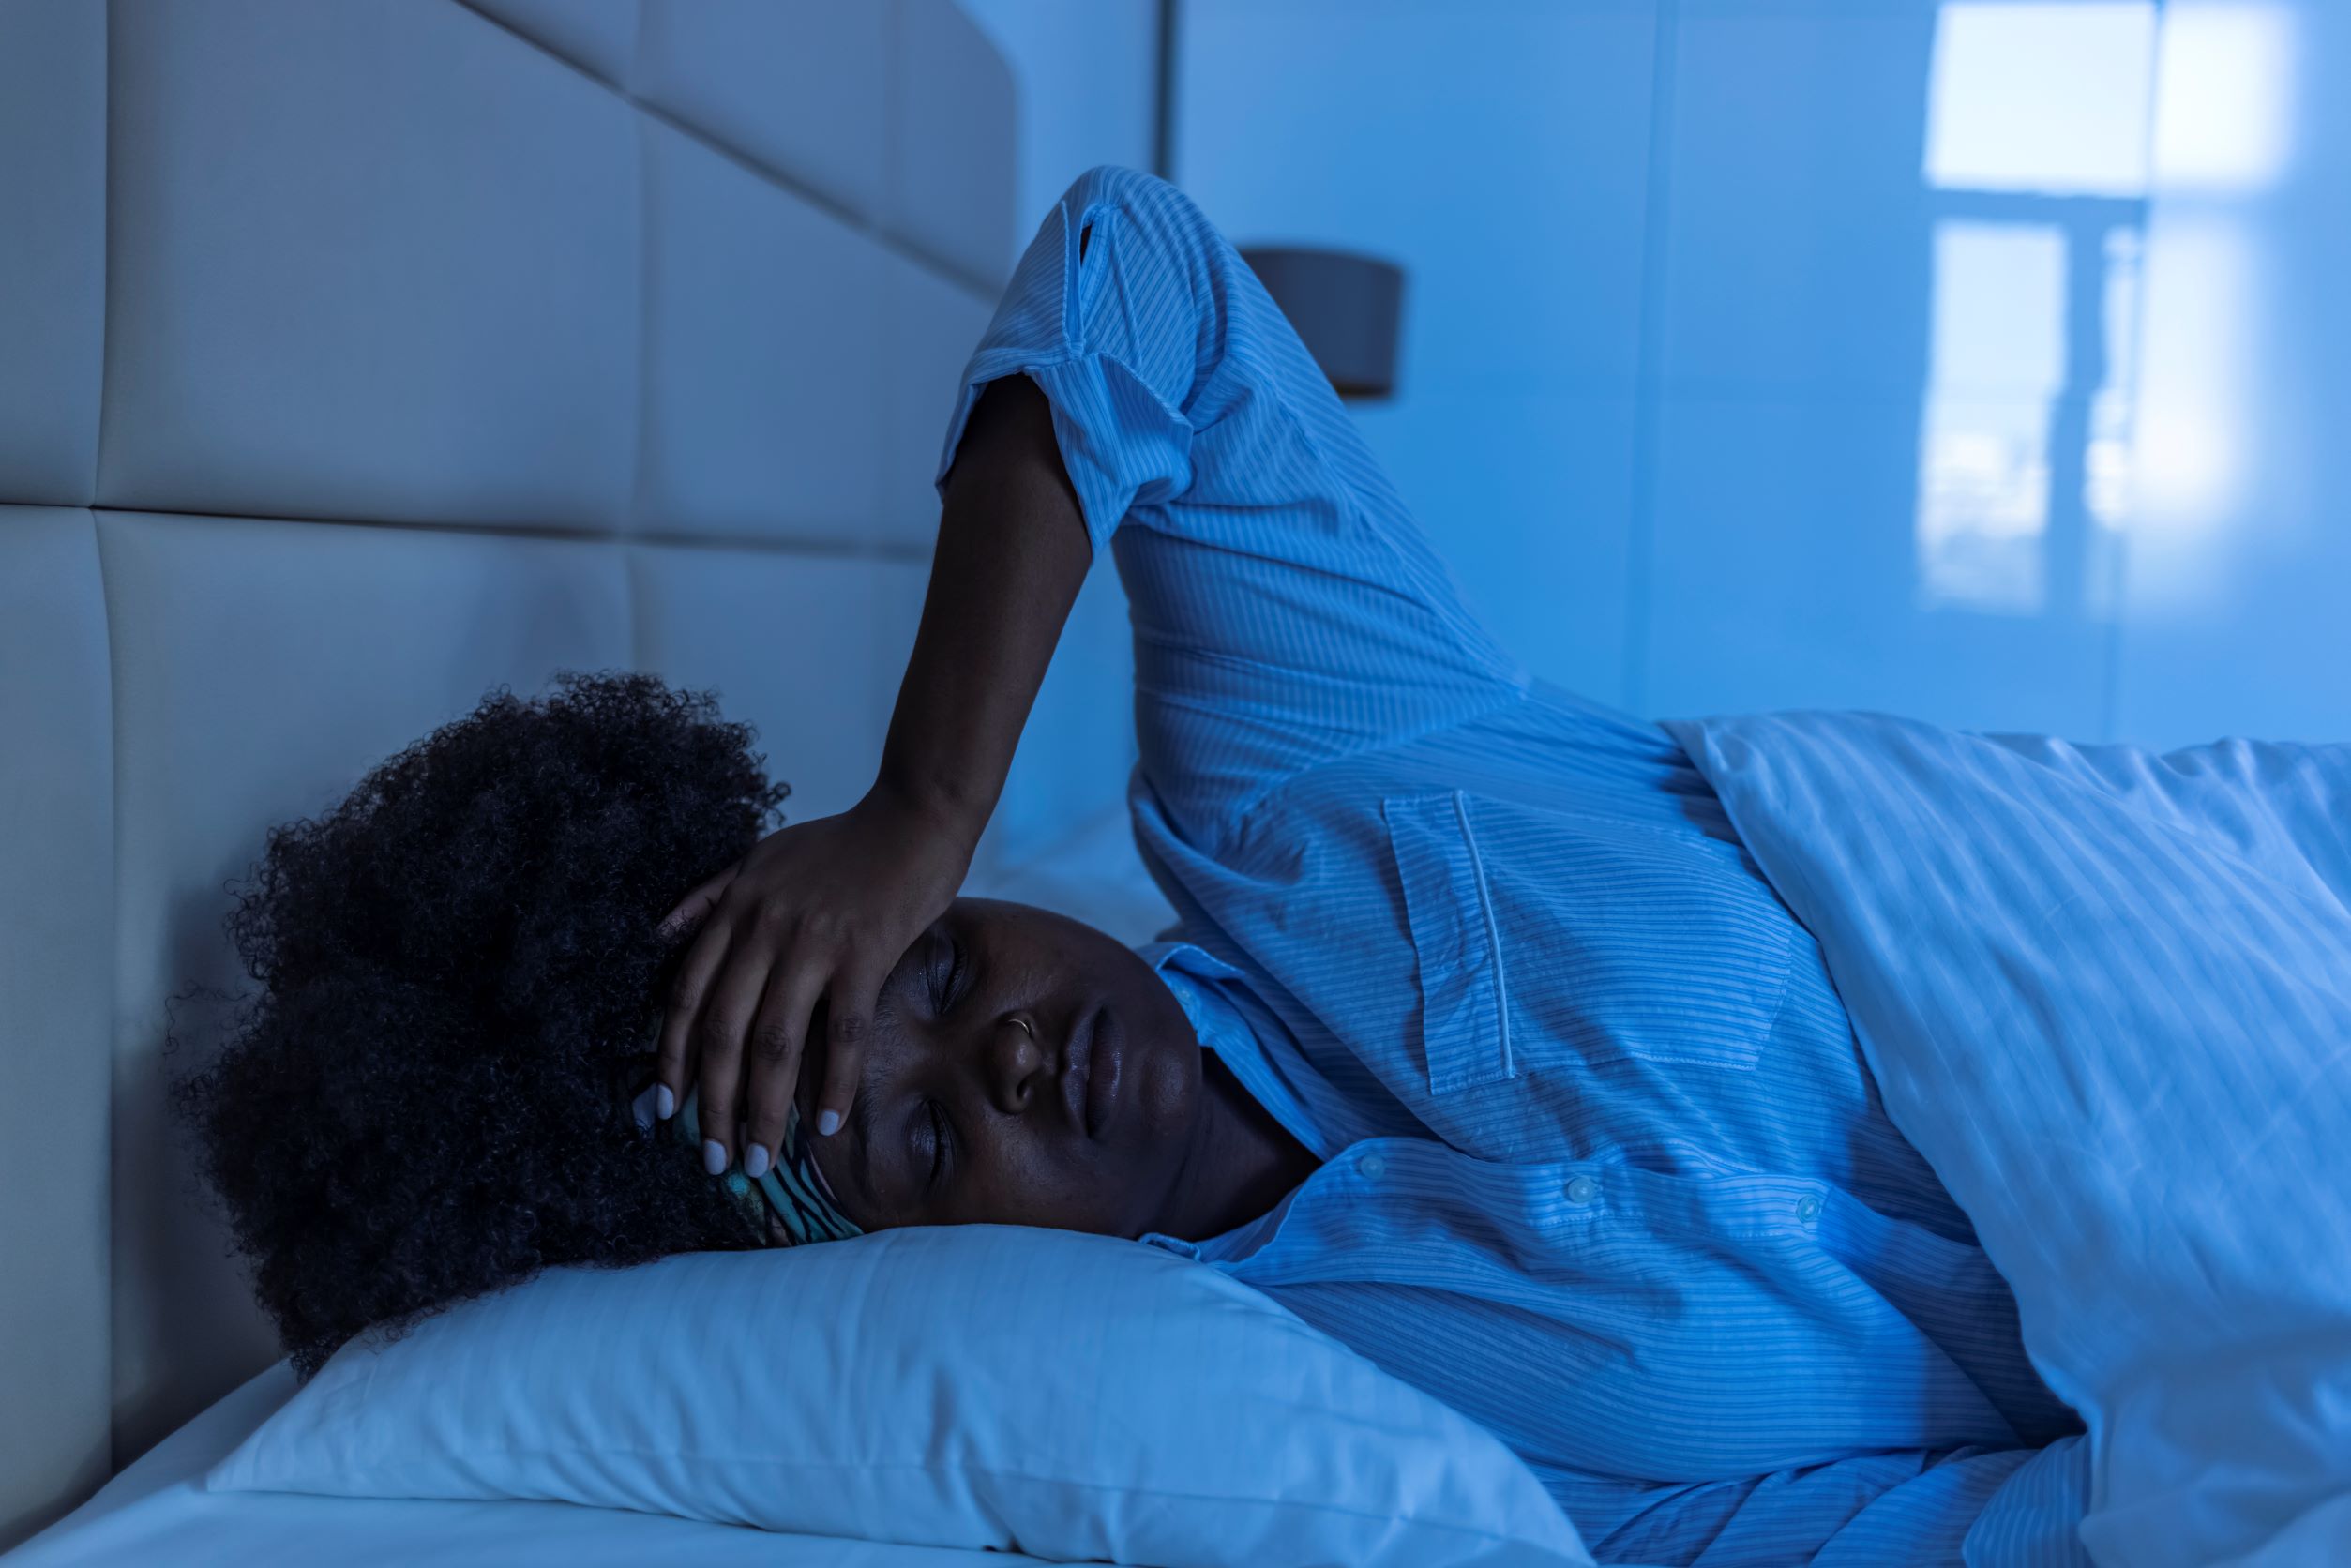 Are You Getting Enough Sleep? If Not, You Could Be at Risk for These Health Issues